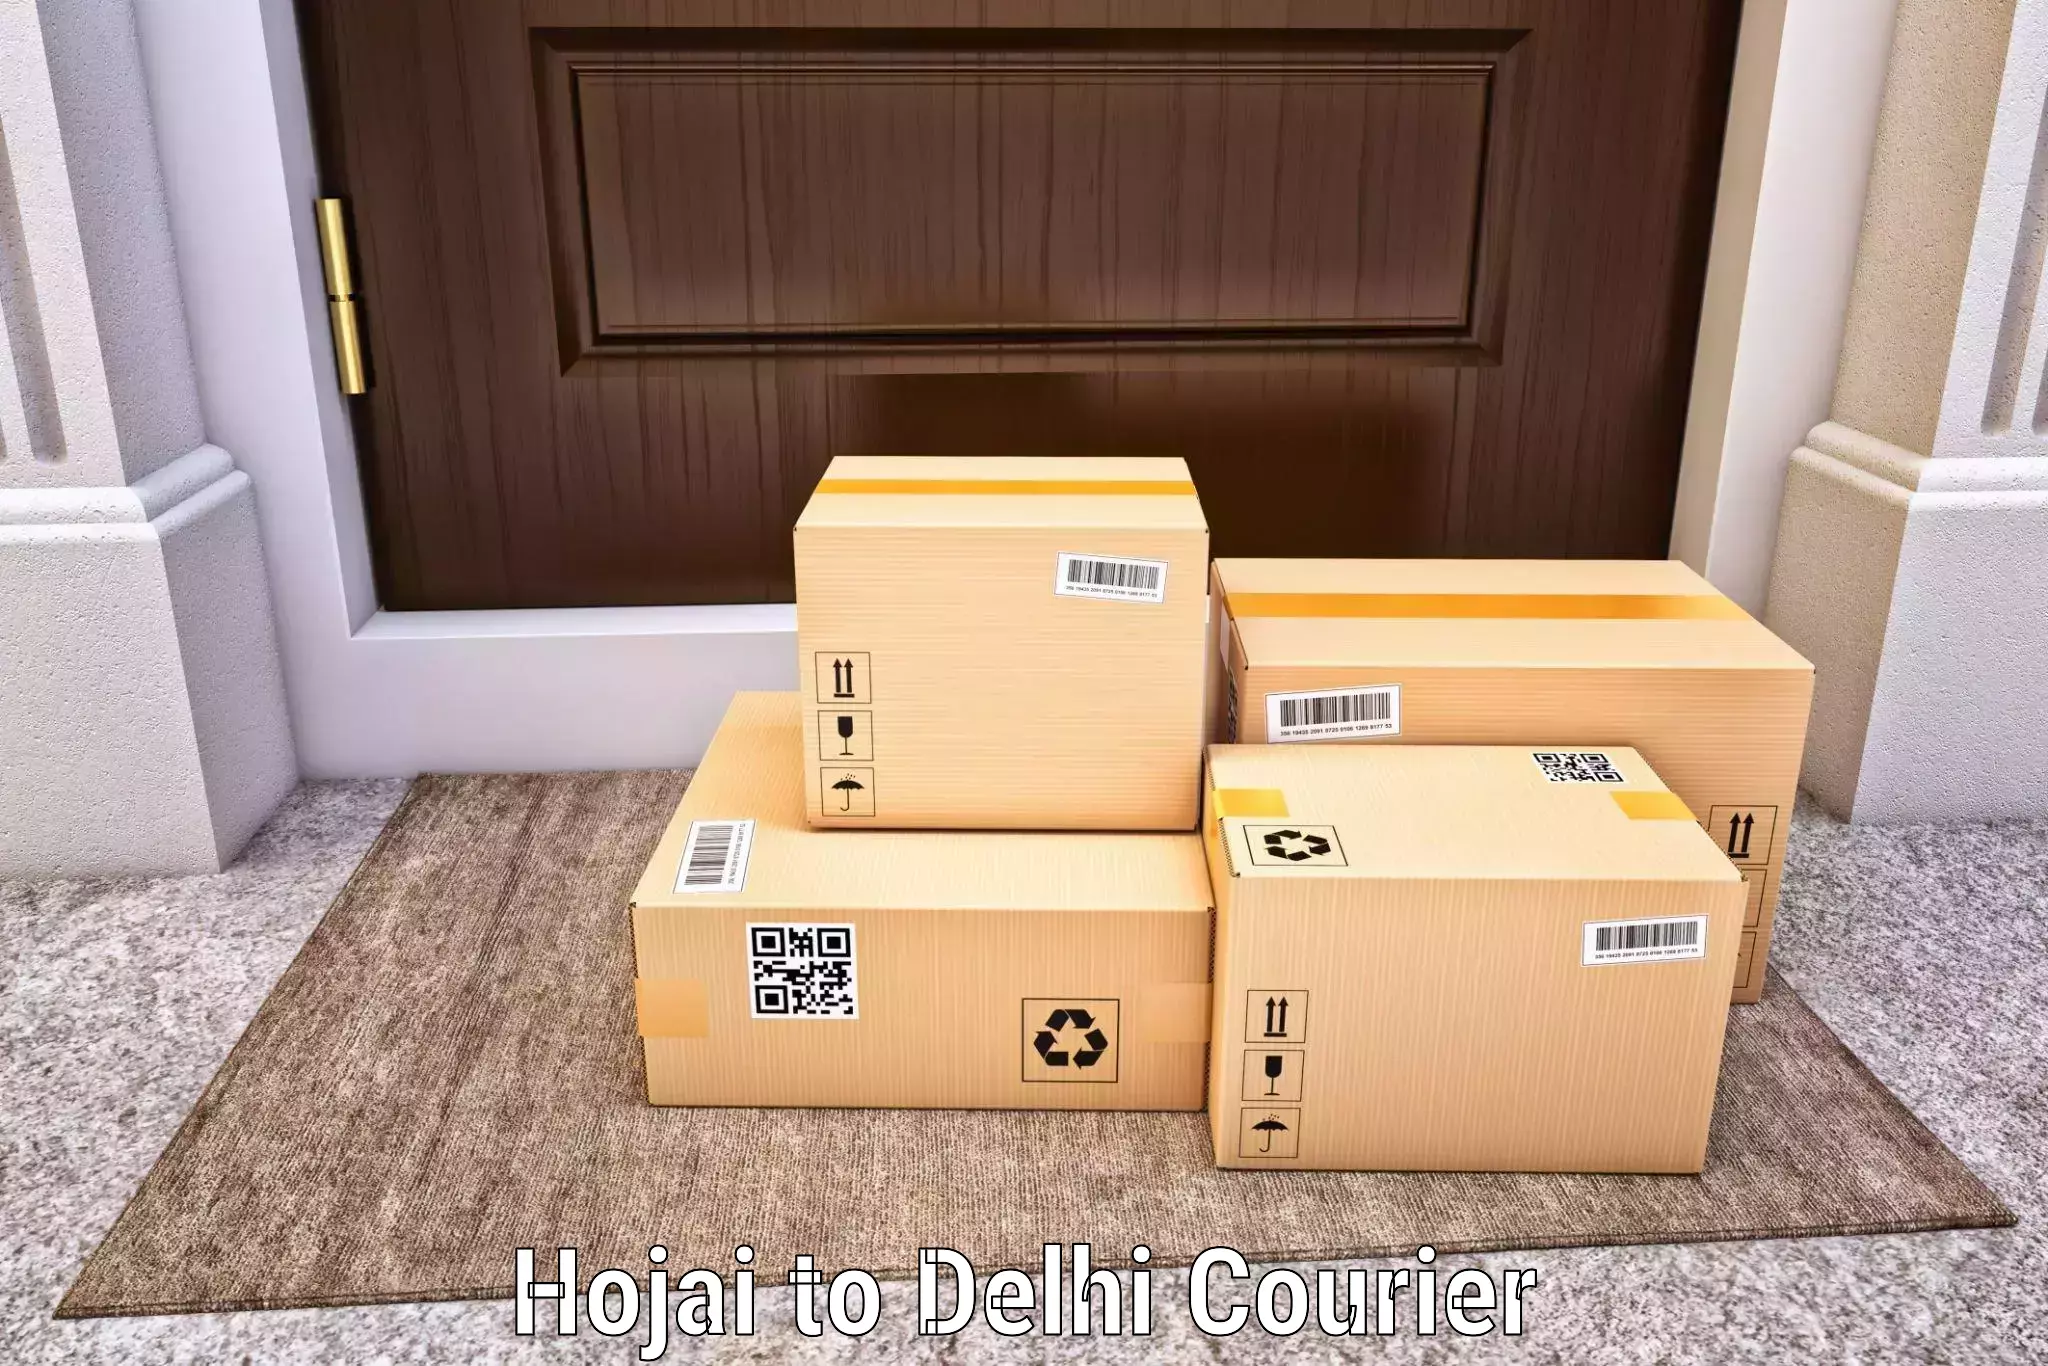 Flexible delivery scheduling Hojai to Delhi